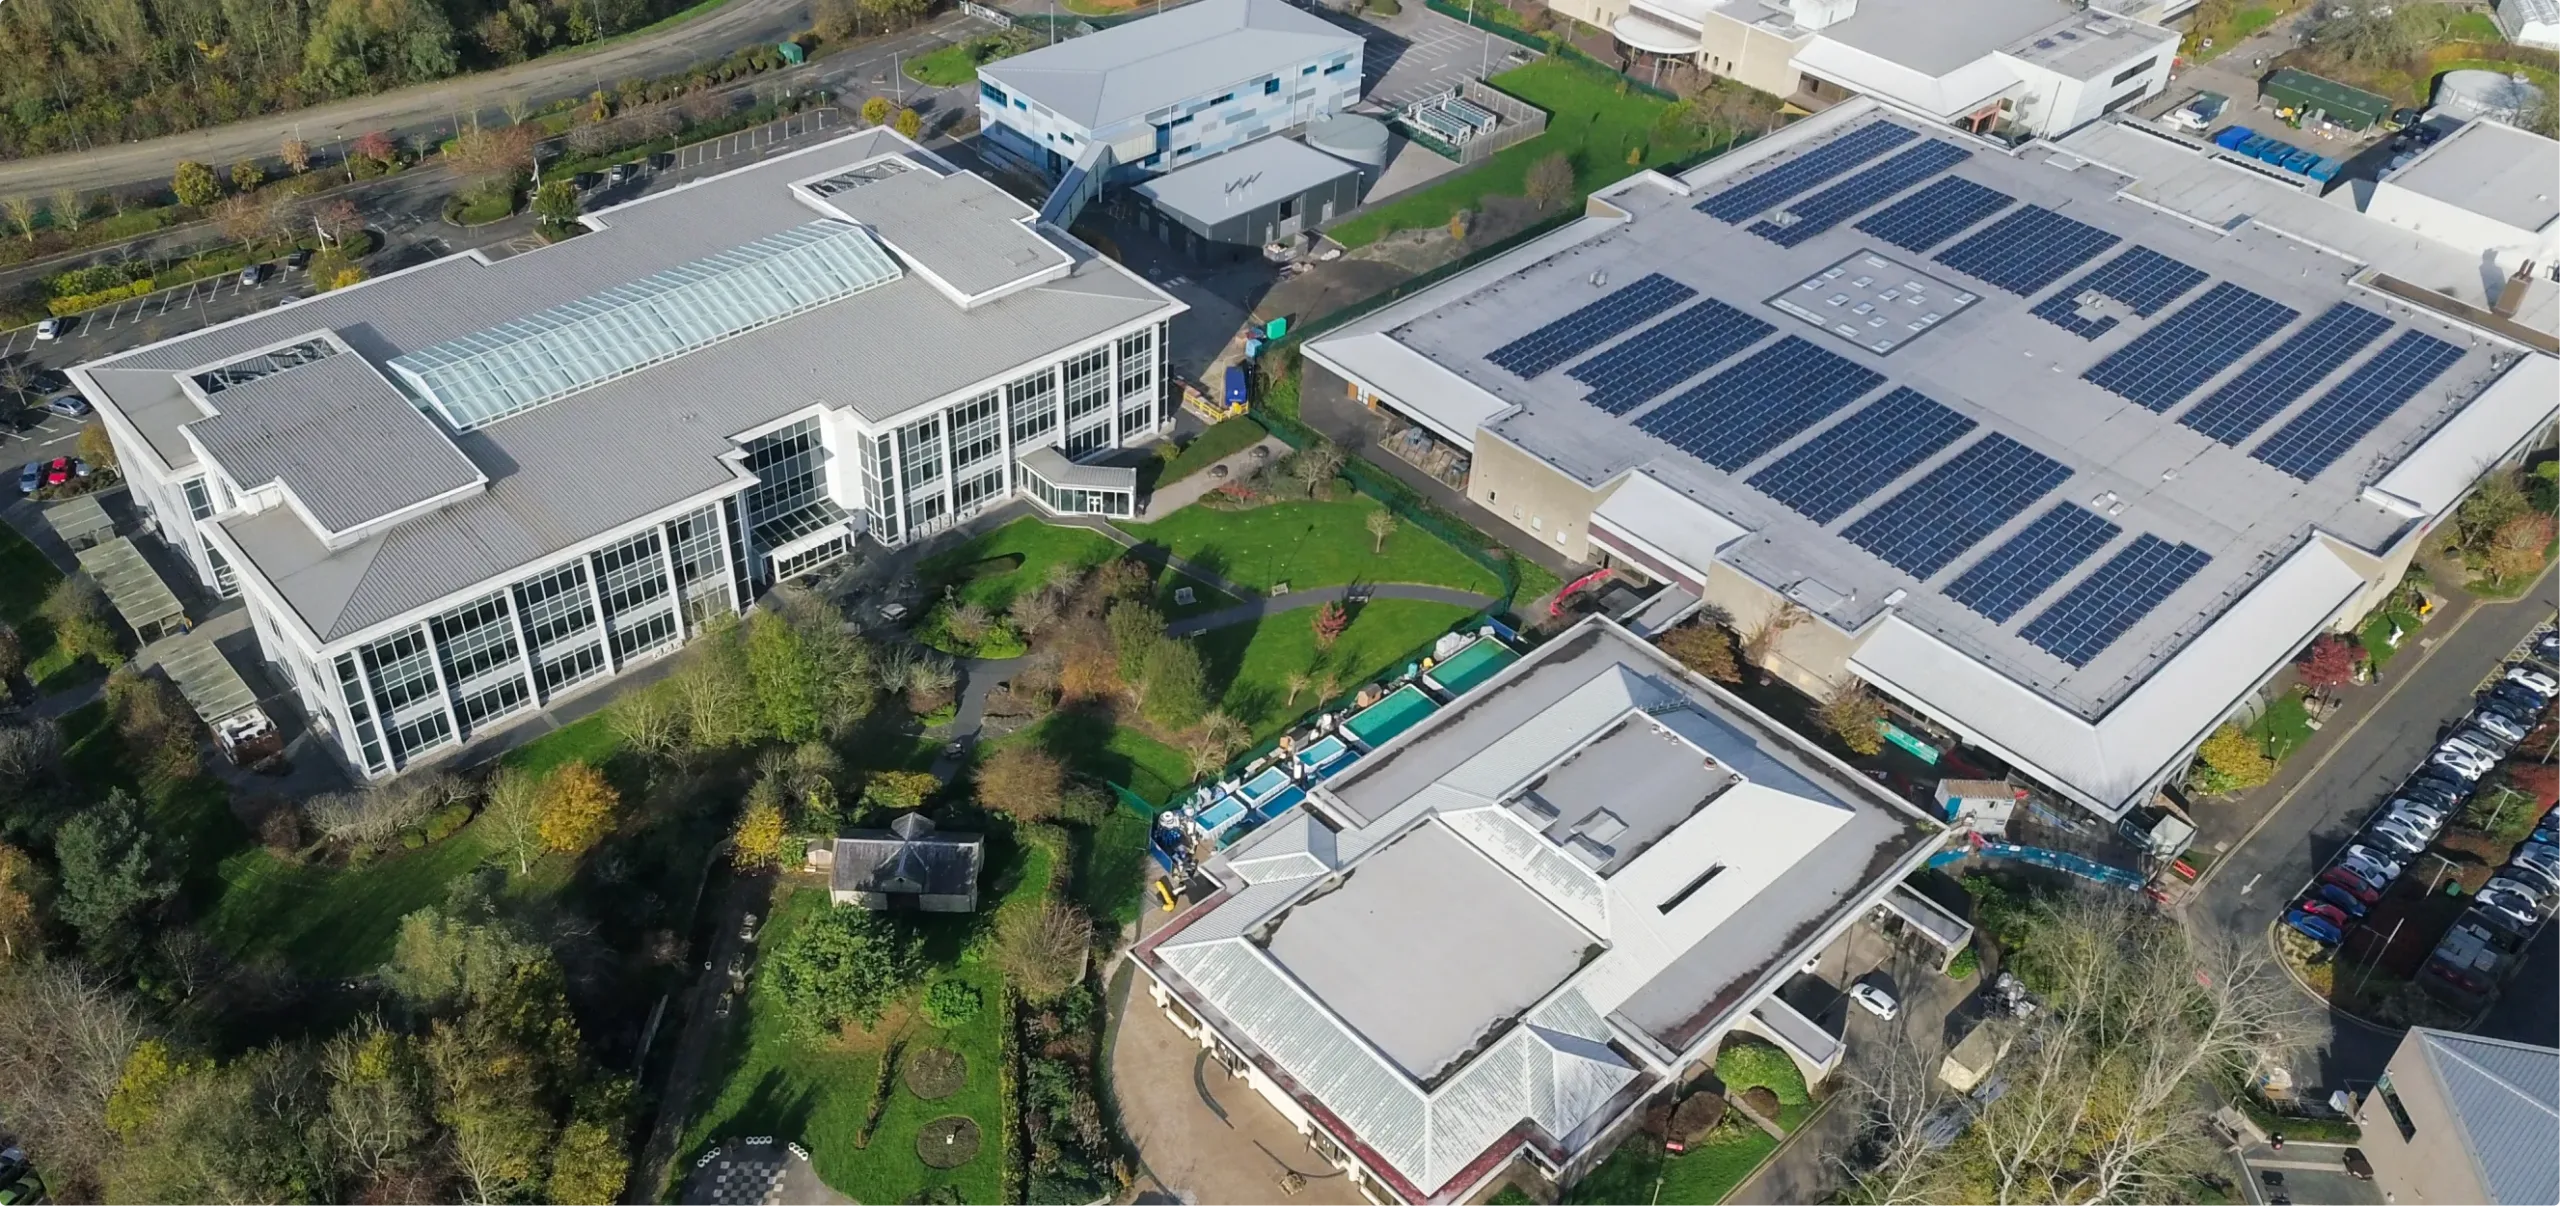 Aerial view of modern buildings with solar panels.